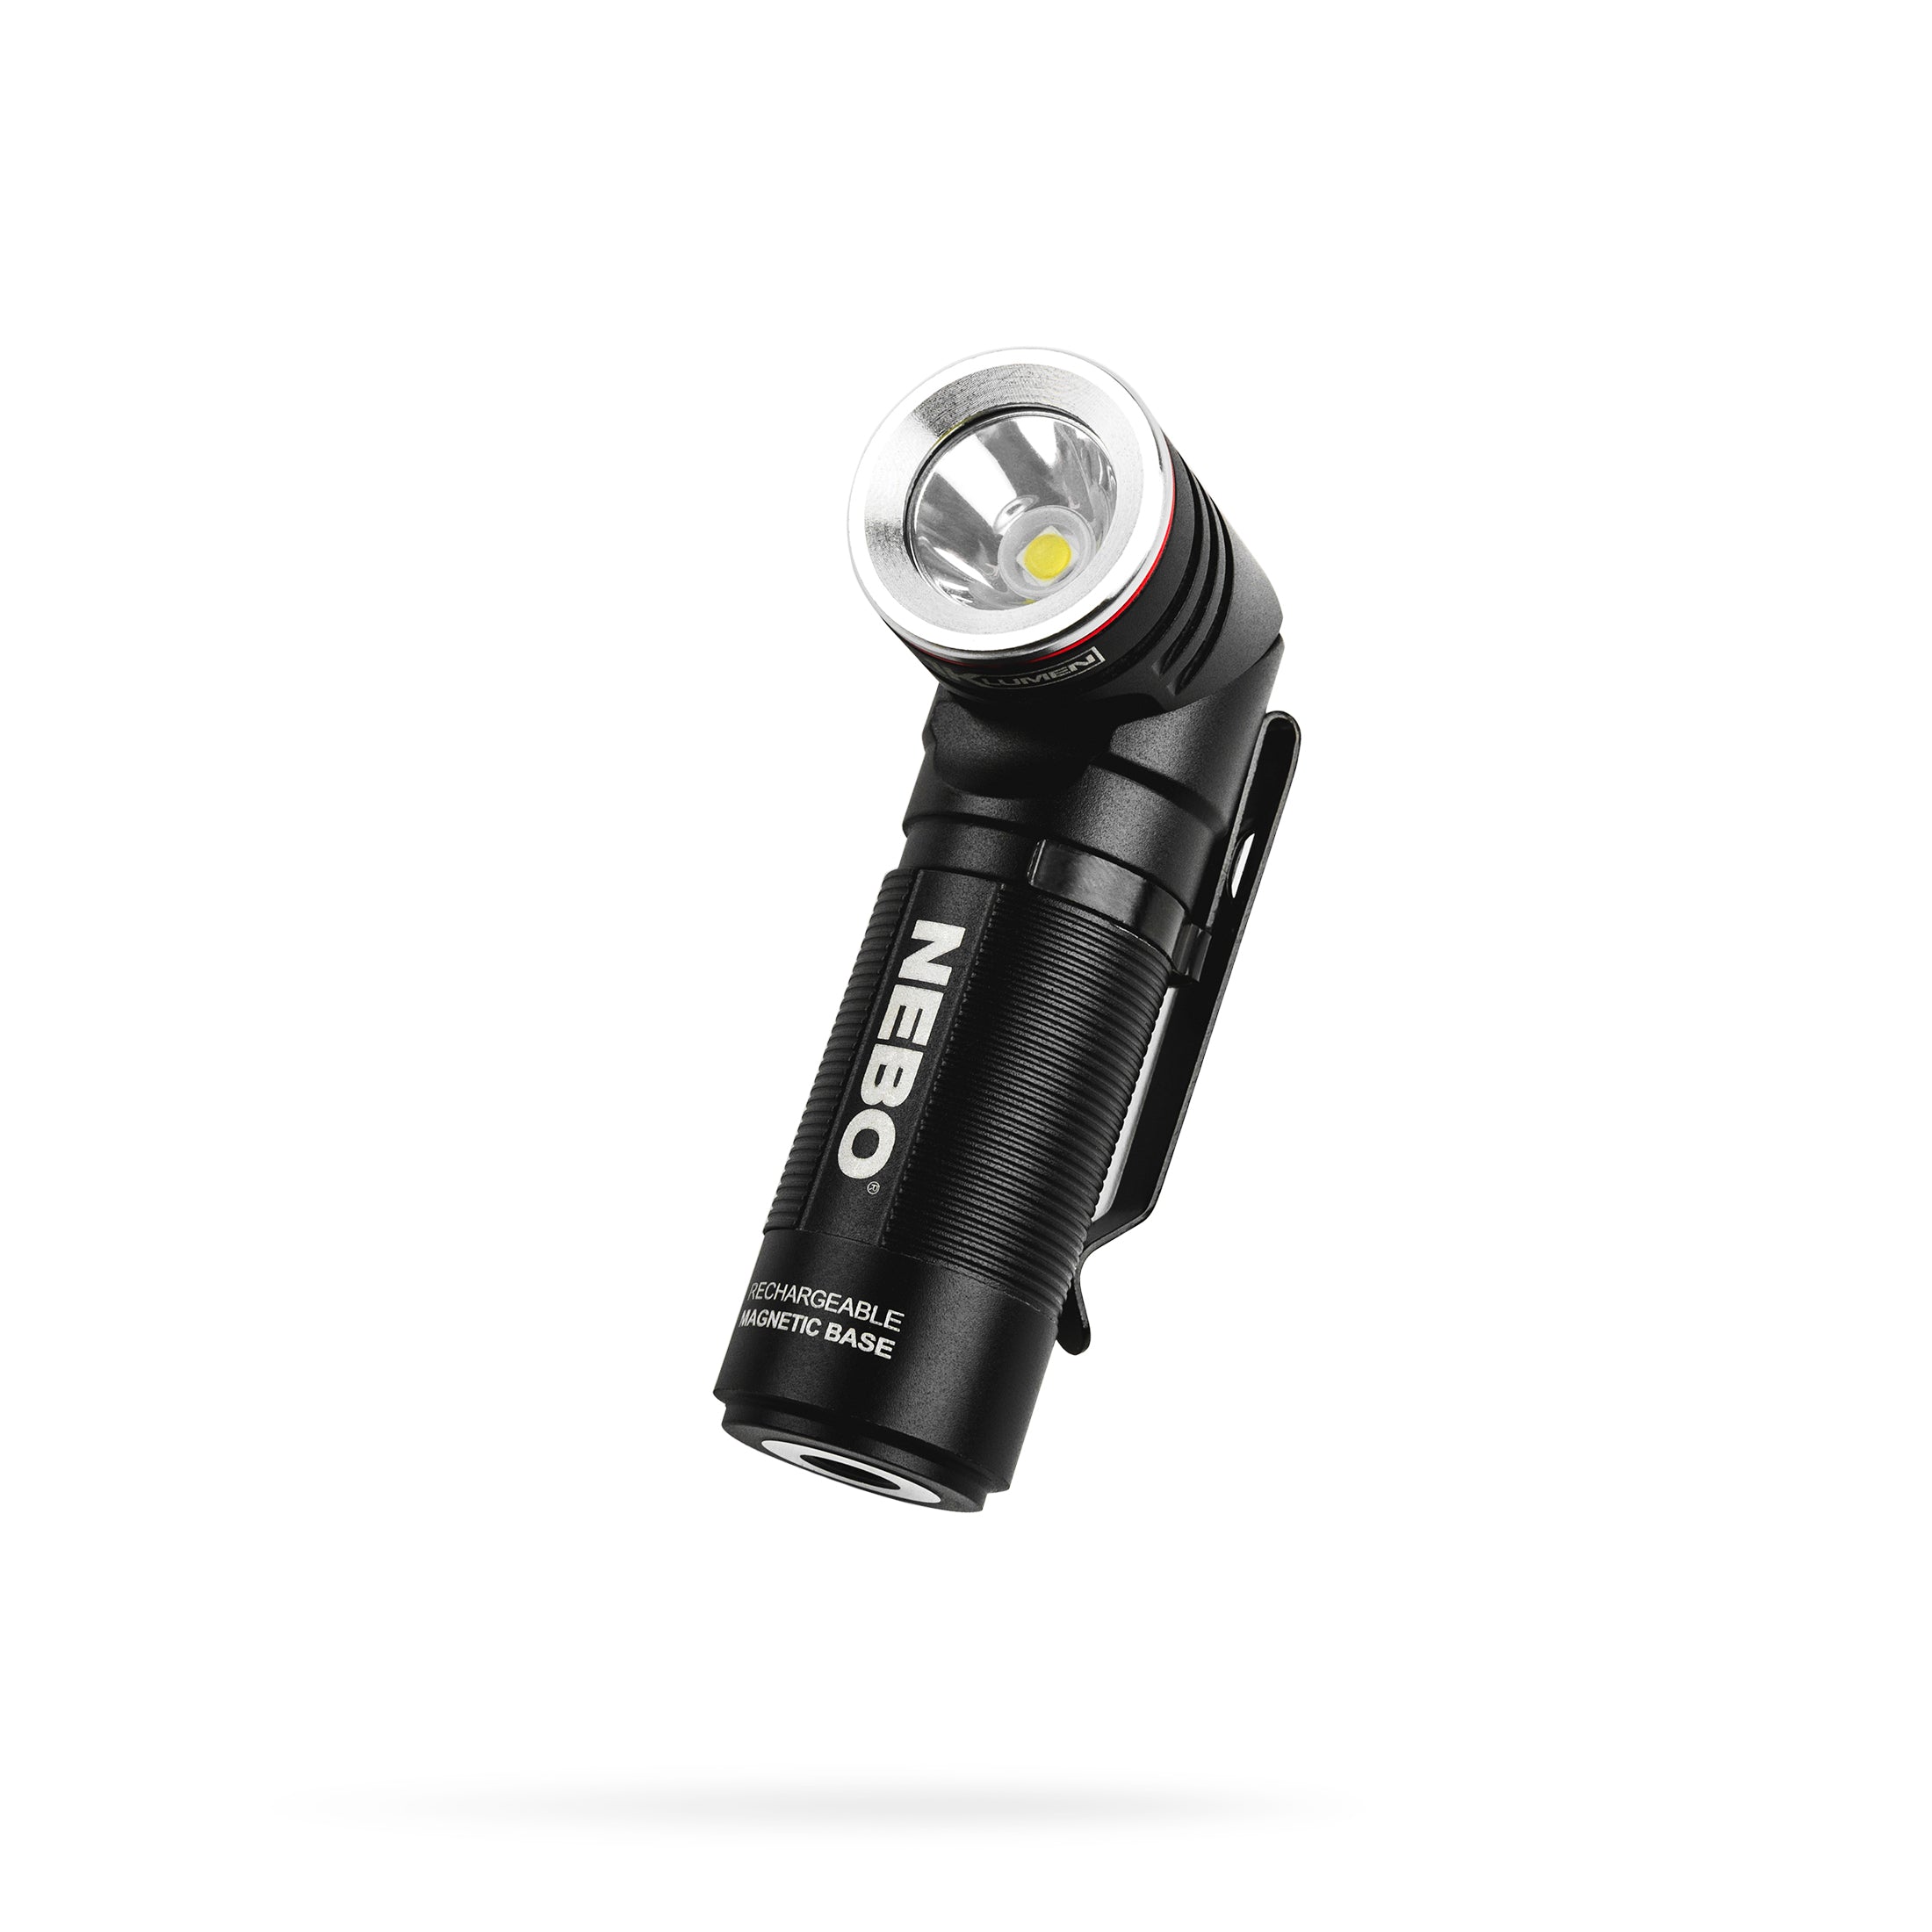 Swyvel 1,000 Lumen Rechargeable EDC Flashlight with a 90º Rotating Swivel Head - Sonic Electric